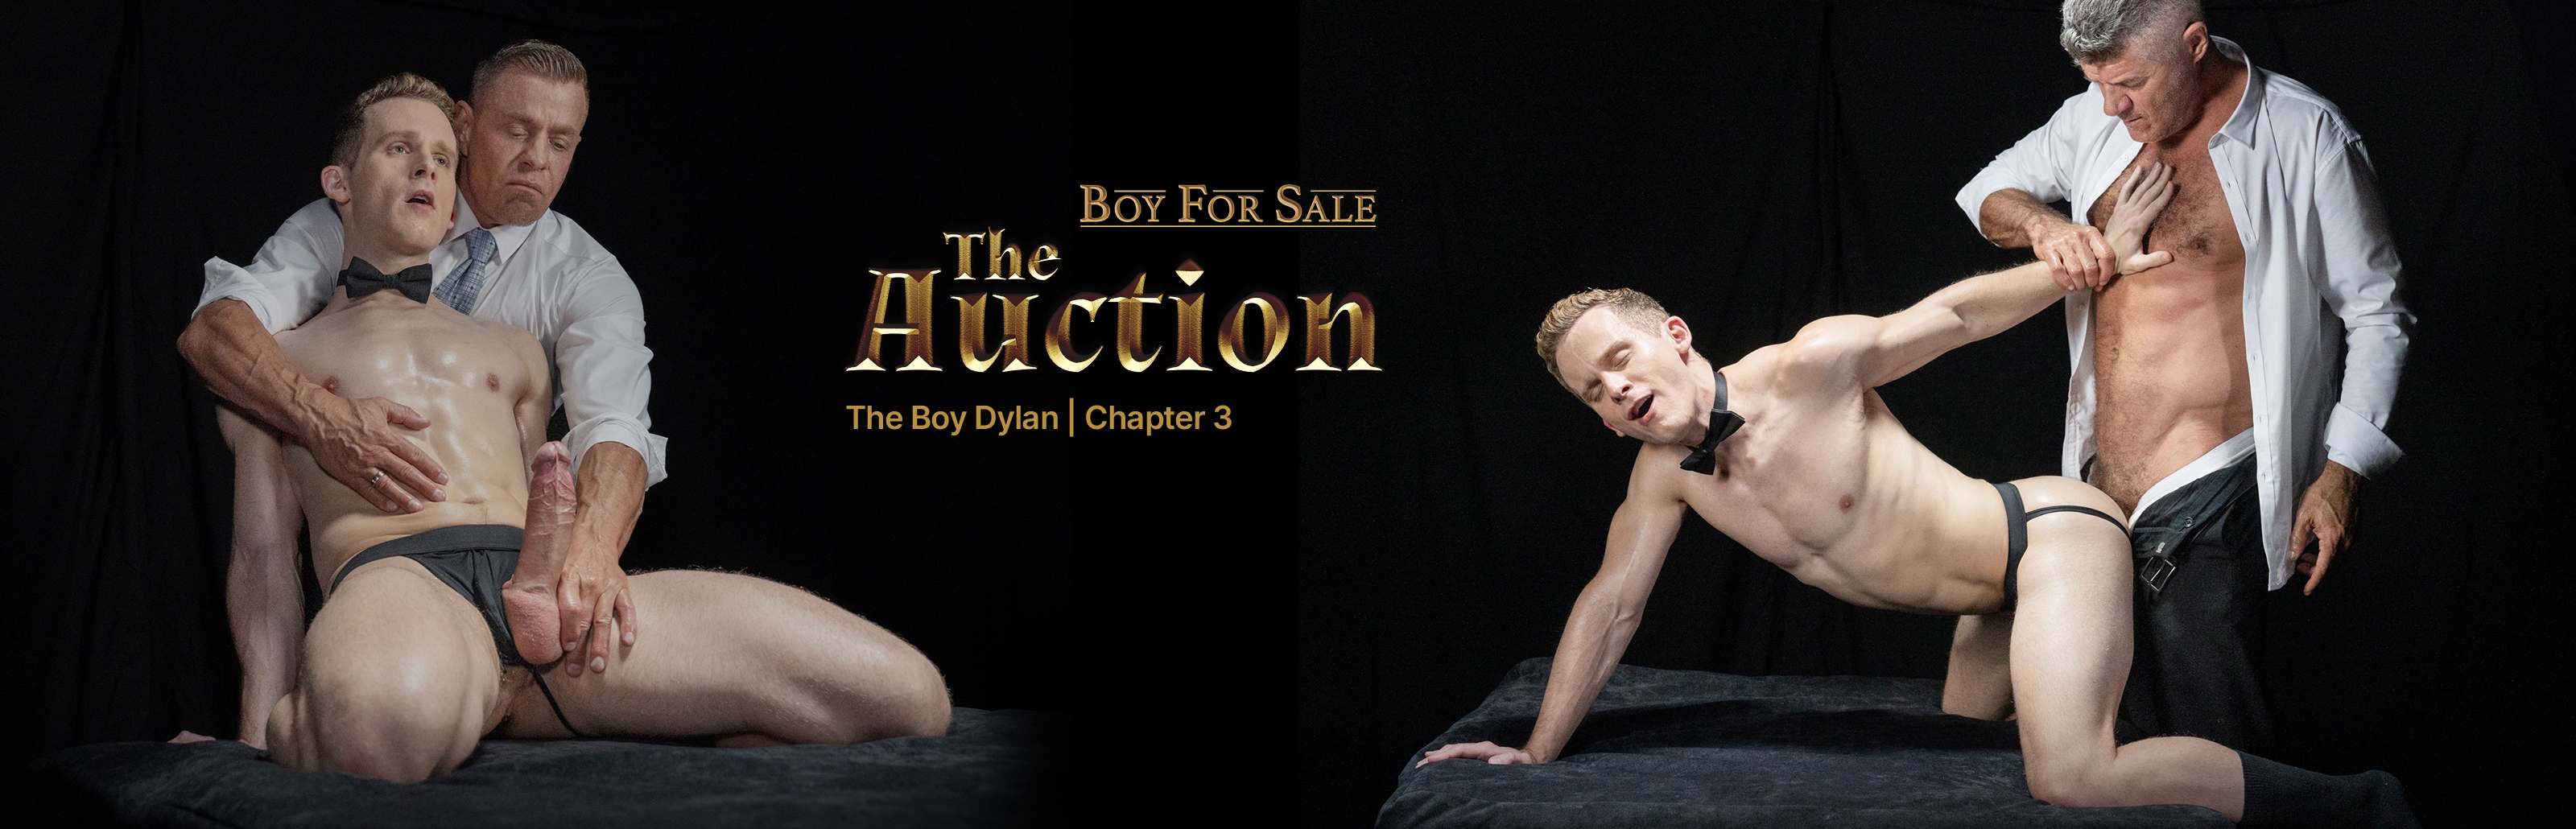 The Auction | THE BOY DYLAN | Chapter 3 Photos 97